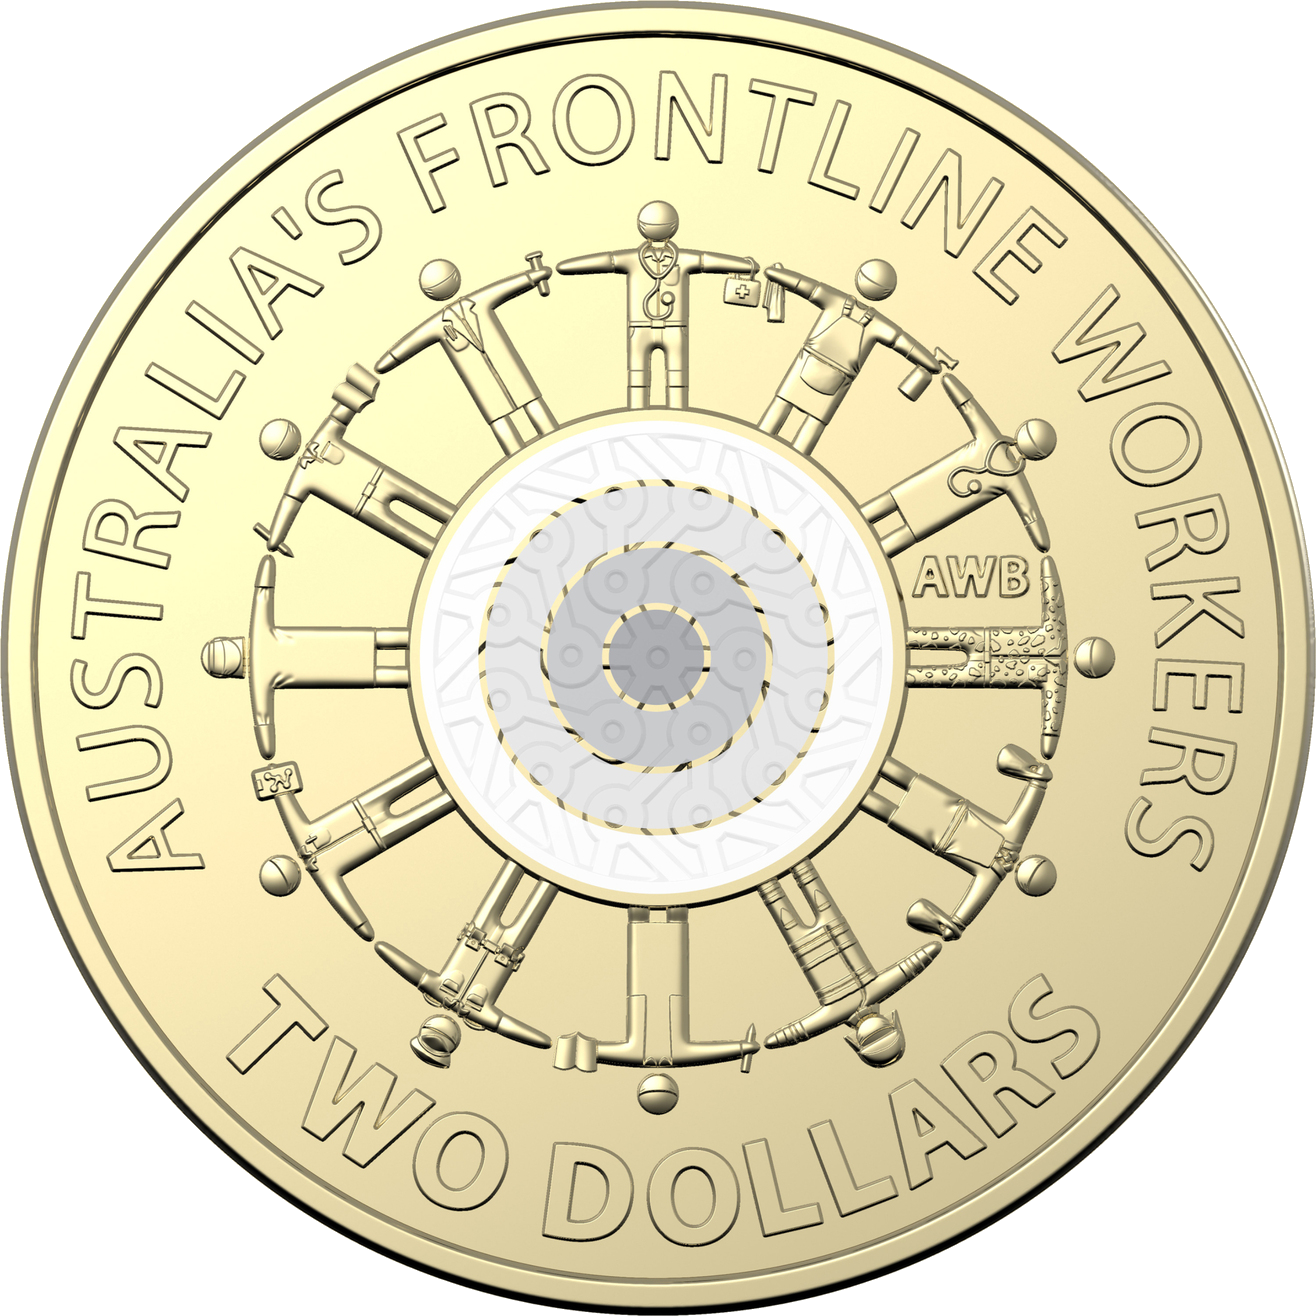 2022 $2 Frontline Workers Coin Pack Style 2